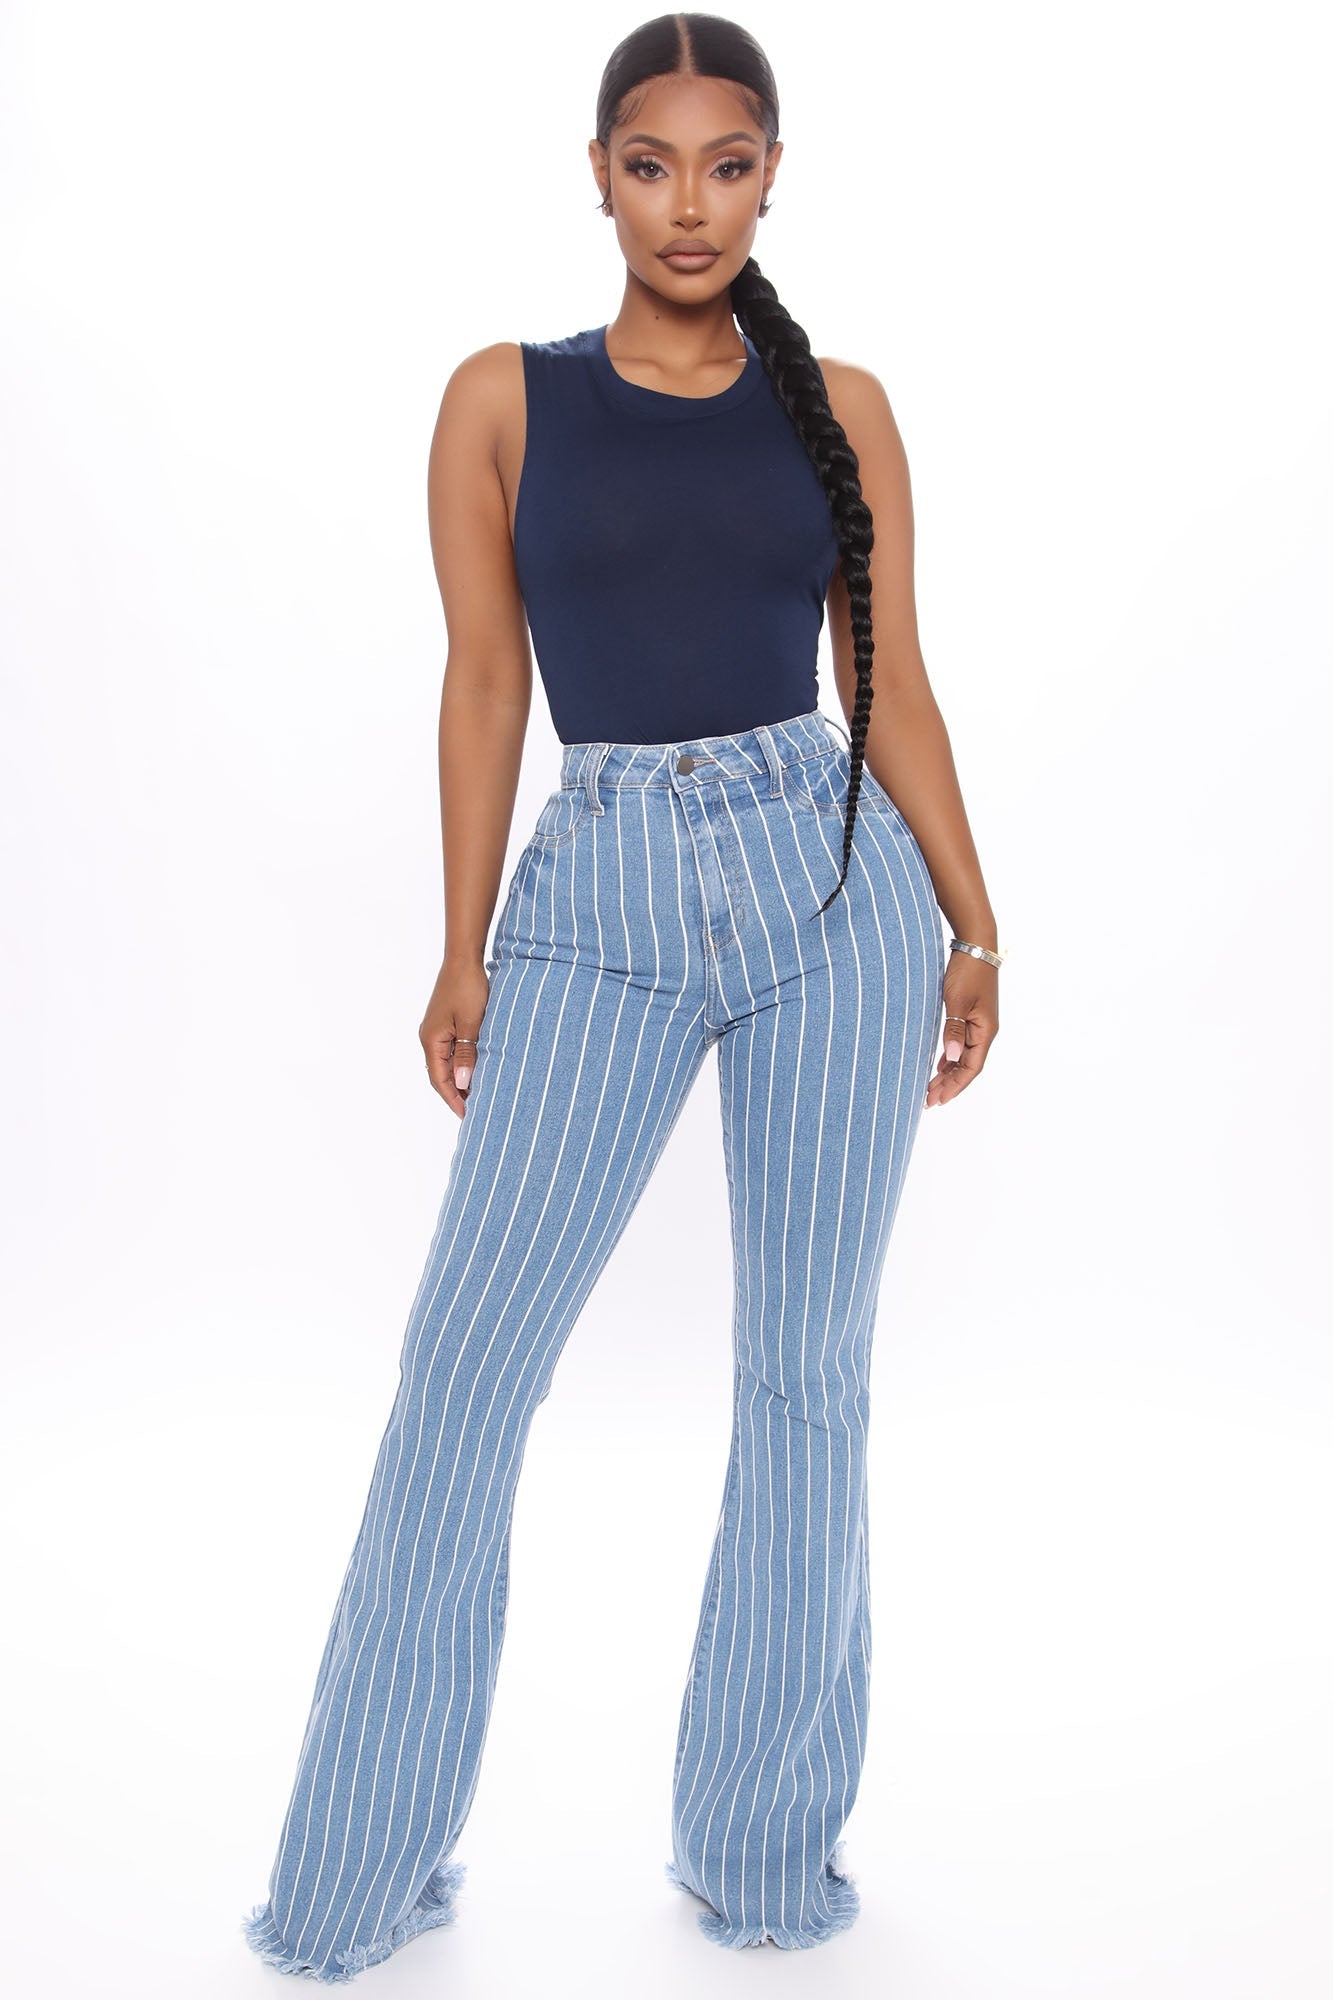 Crossed The Line Striped Flare Jeans - Light Blue Wash Ins Street